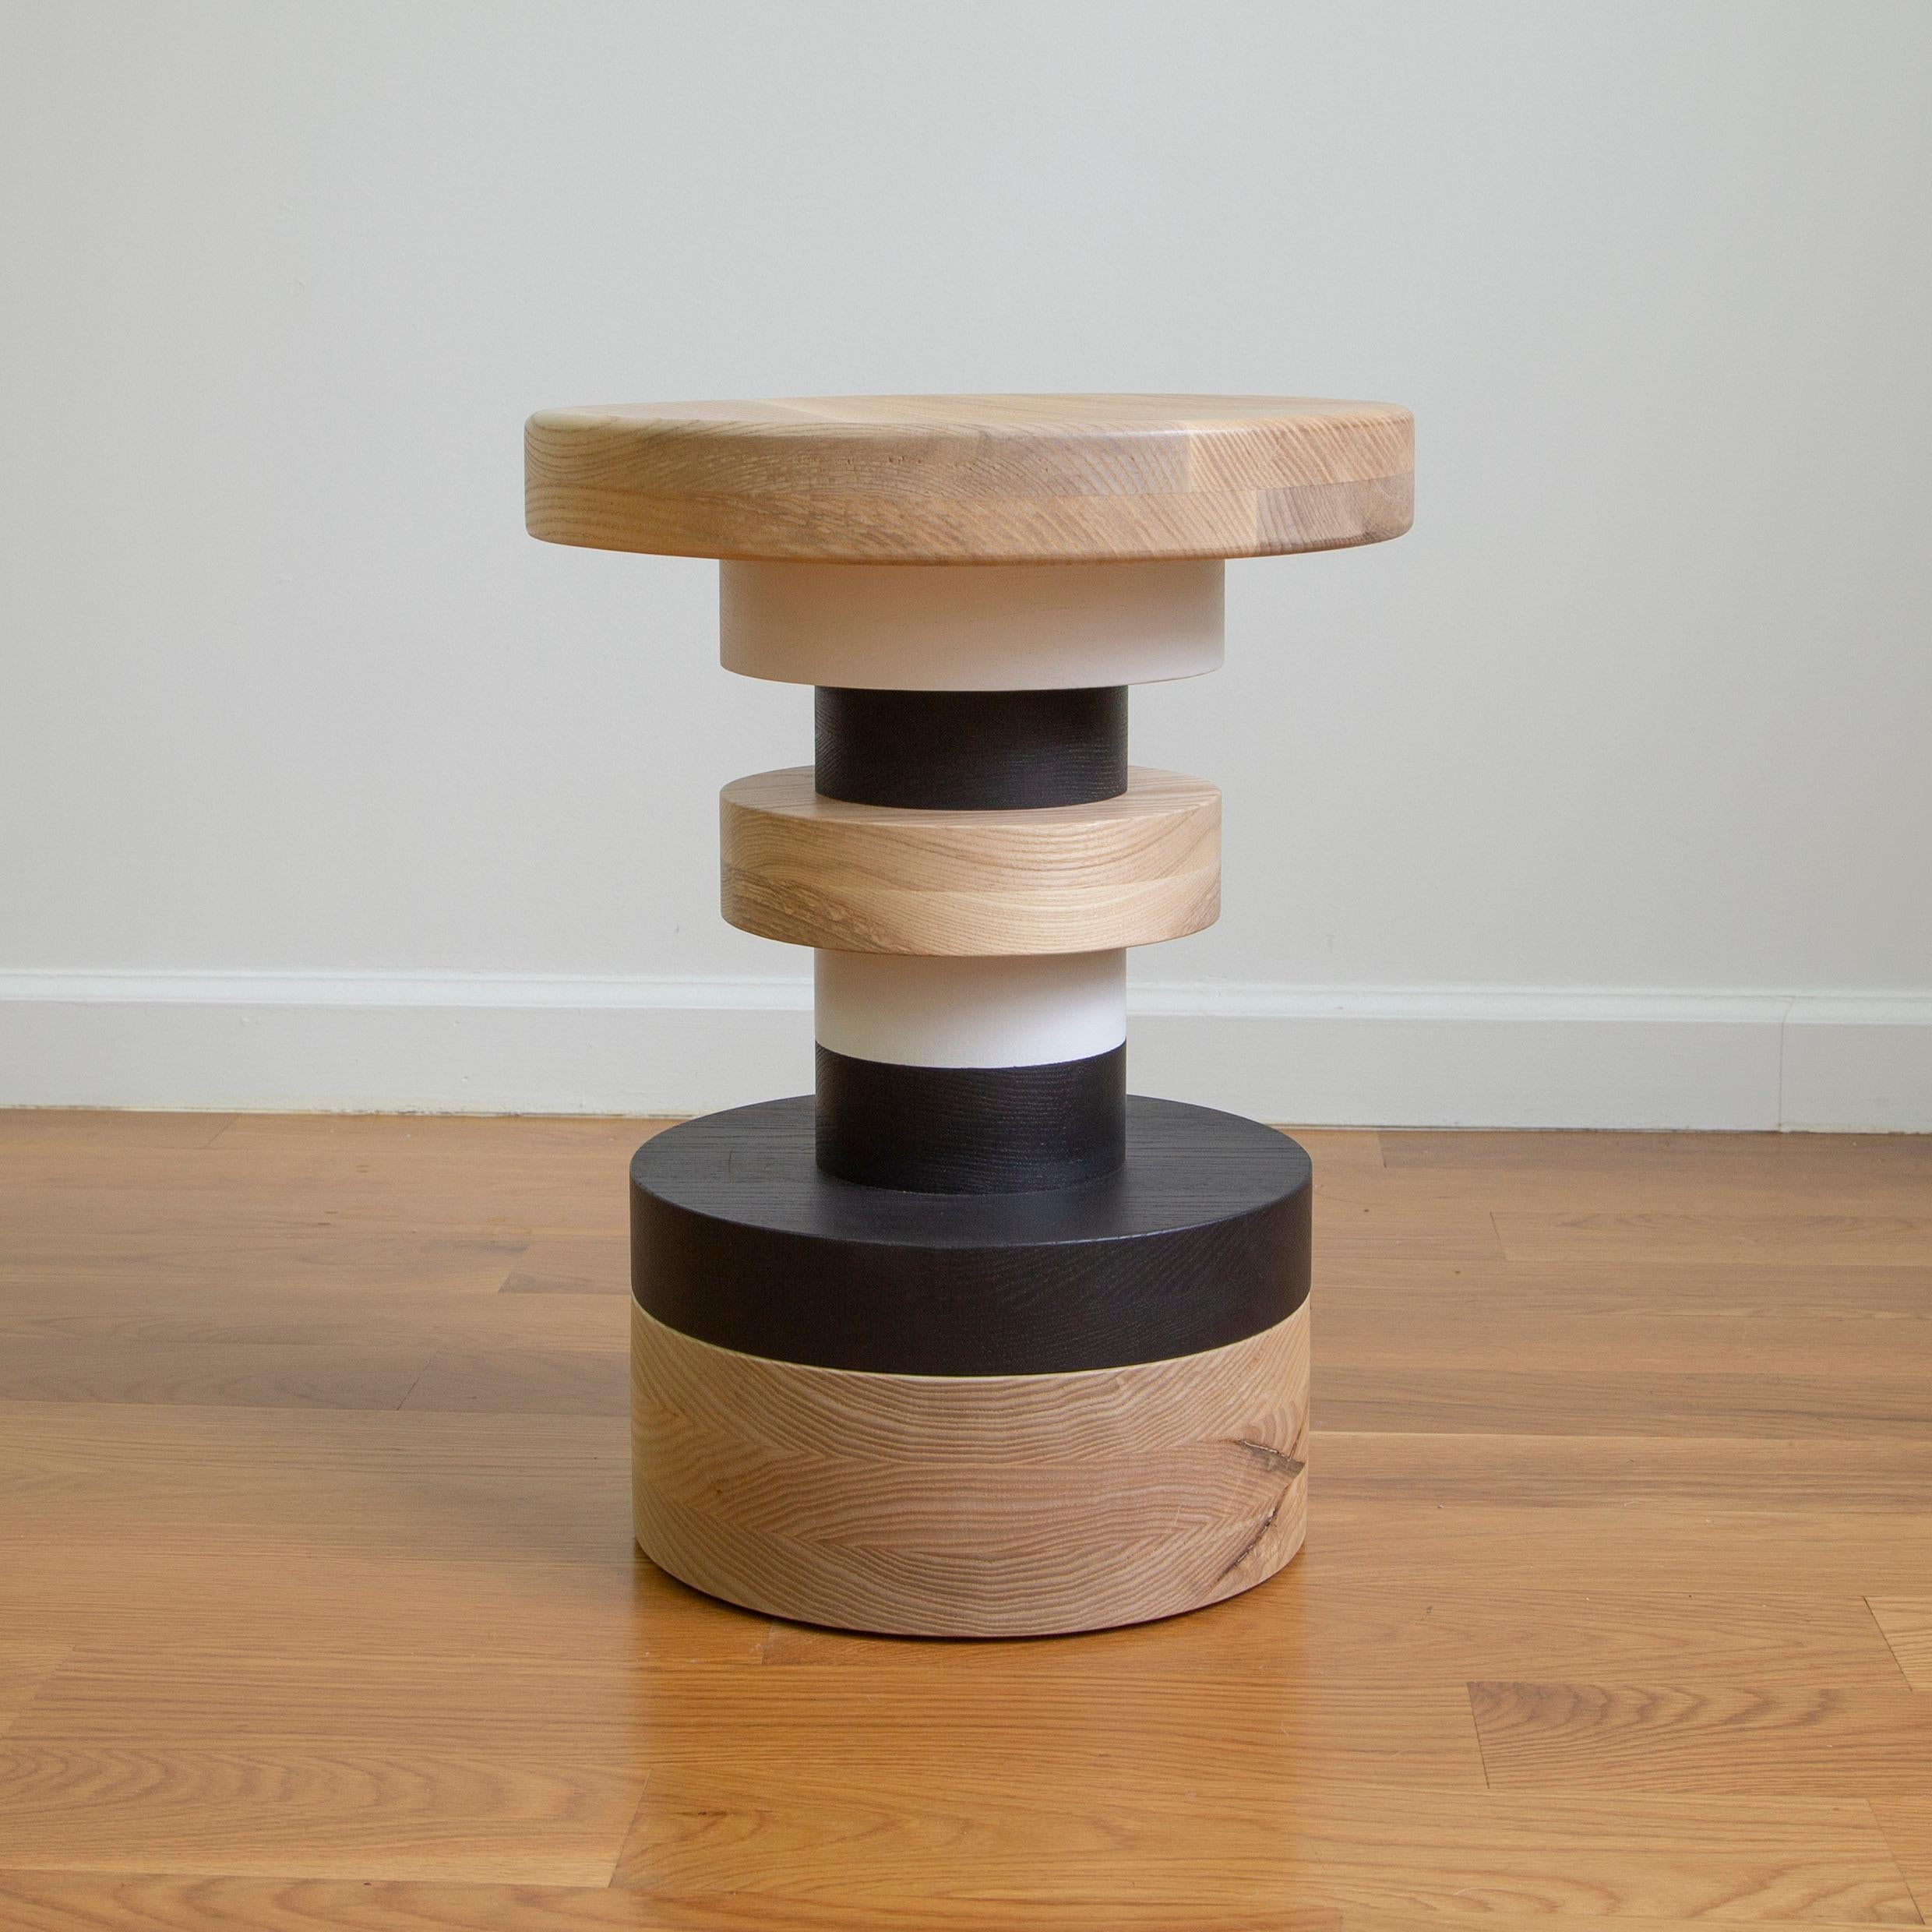 This listing is for 1 Sass Stool from Souda. We offer three different shapes (A, B, & C). This listing is for 'B', which is the stool in the first image. 

The Sottsass inspired “Sass Stools” are simple, sculptural accents for any interior space.